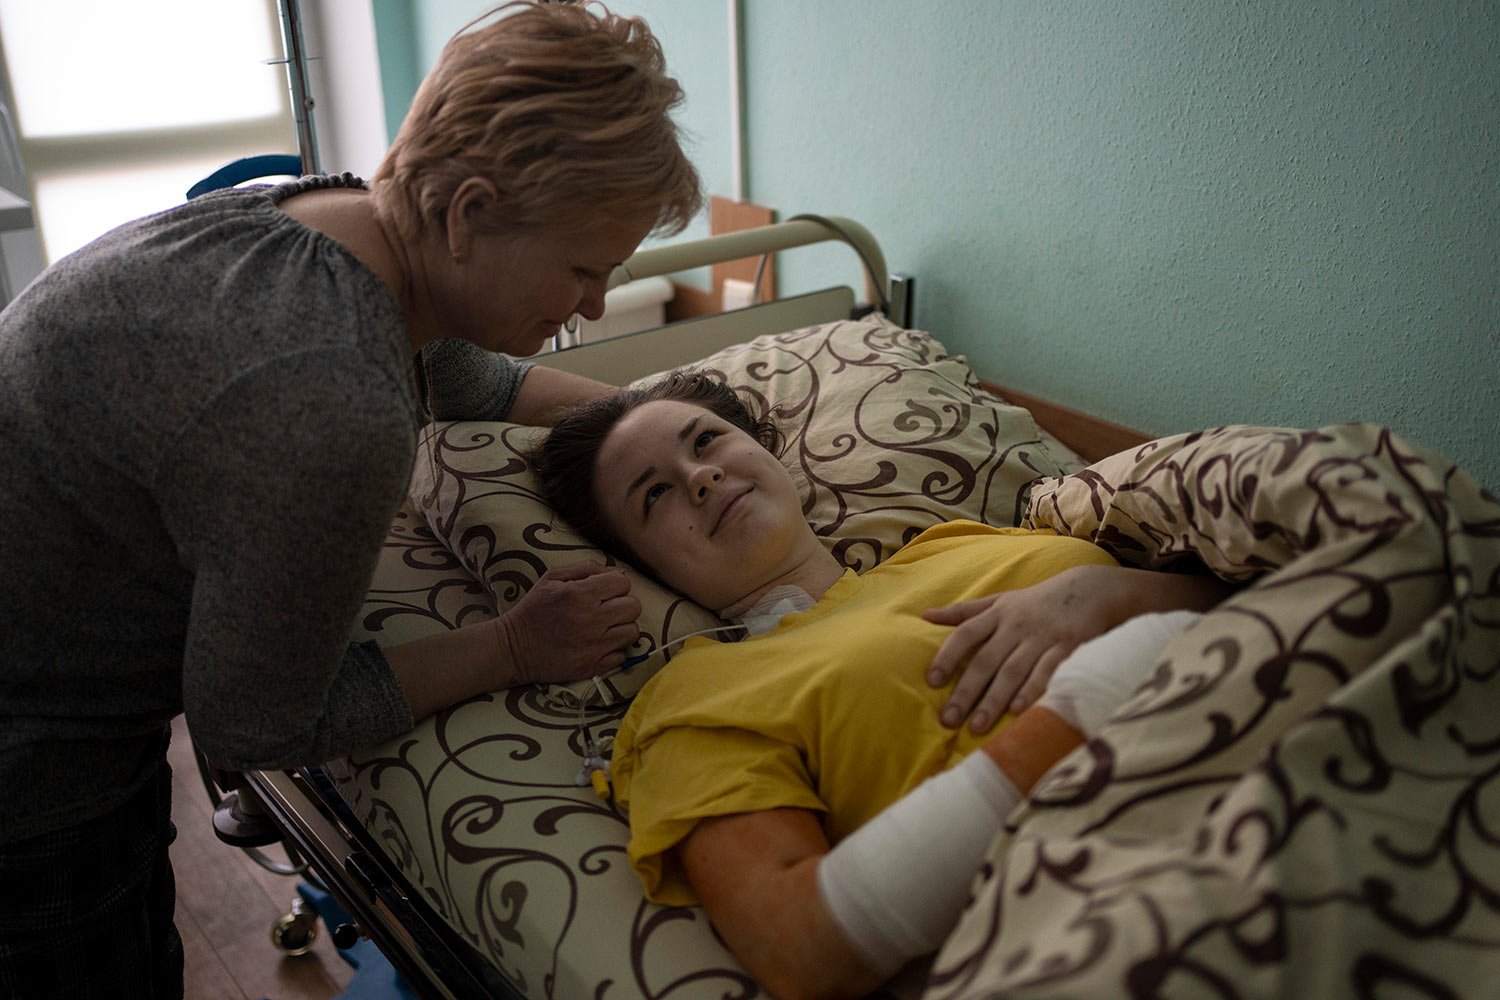  Nastya Kuzyk, 20, is comforted by her mother Svitlana, 50, while recovering in a hospital in Kyiv, Ukraine, Friday, March 25, 2022, with injuries caused after a Russian attack in her city of Chernihiv. (AP Photo/Rodrigo Abd) 